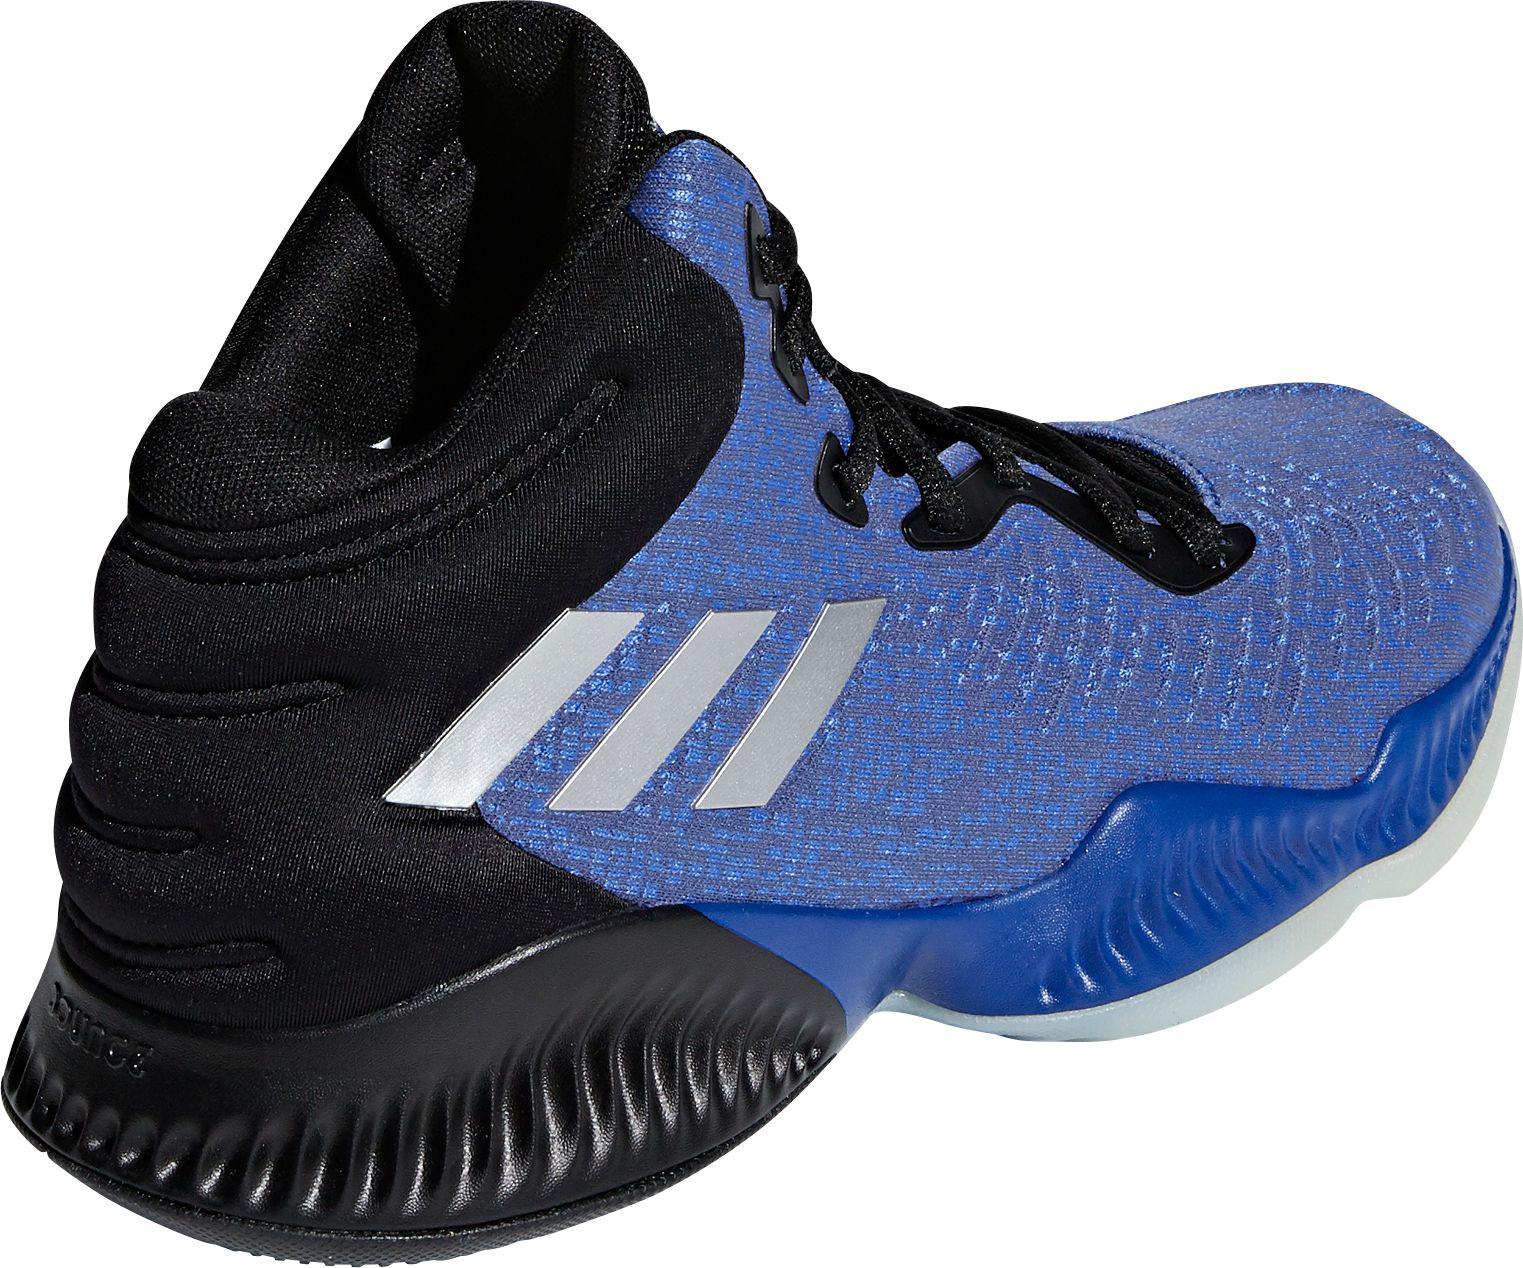 Mad Bounce 2018 Basketball Shoes 